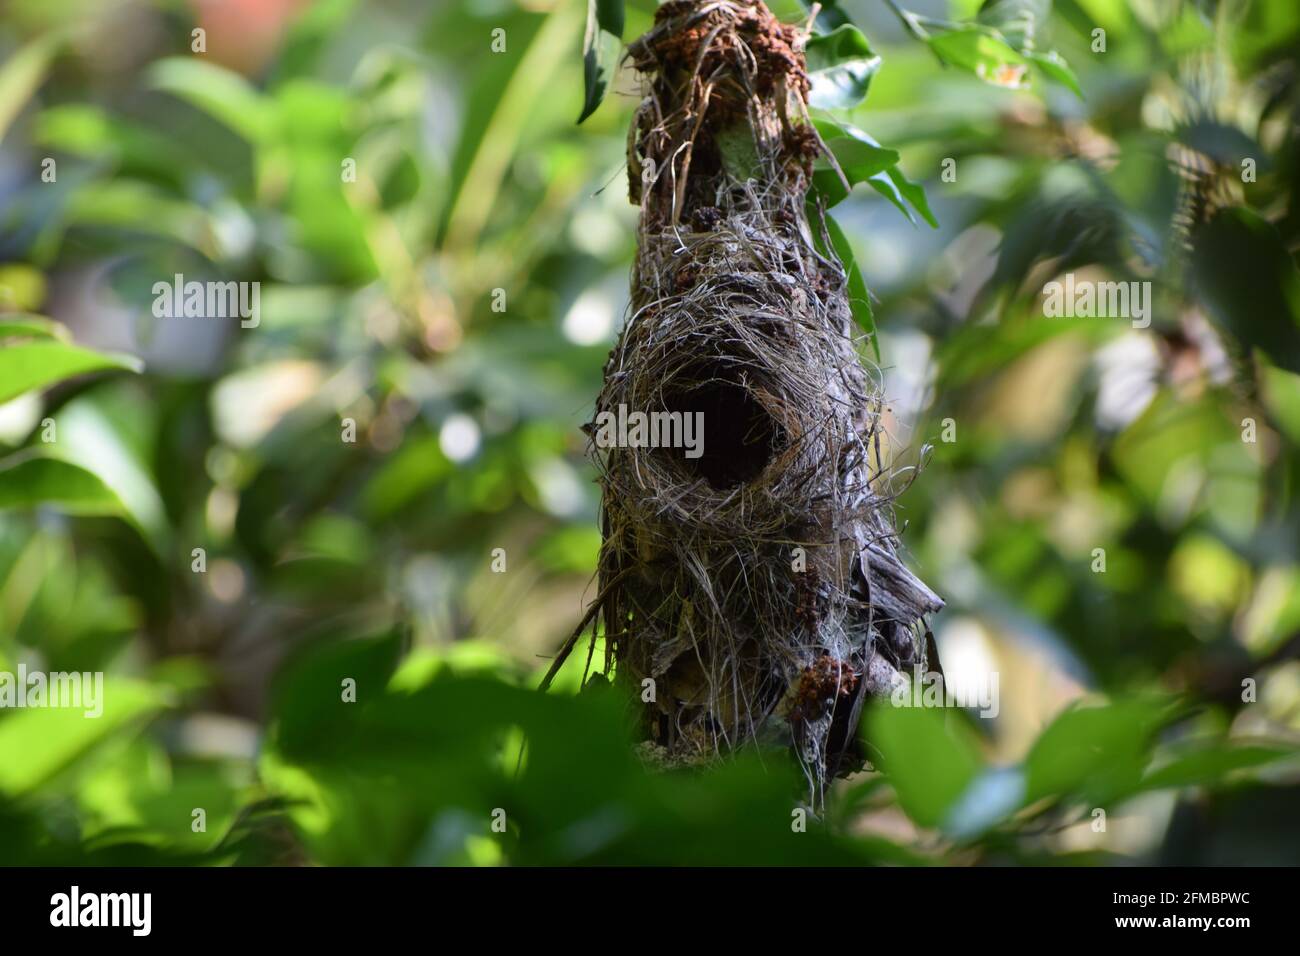 The nest of sparrow. Stock Photo